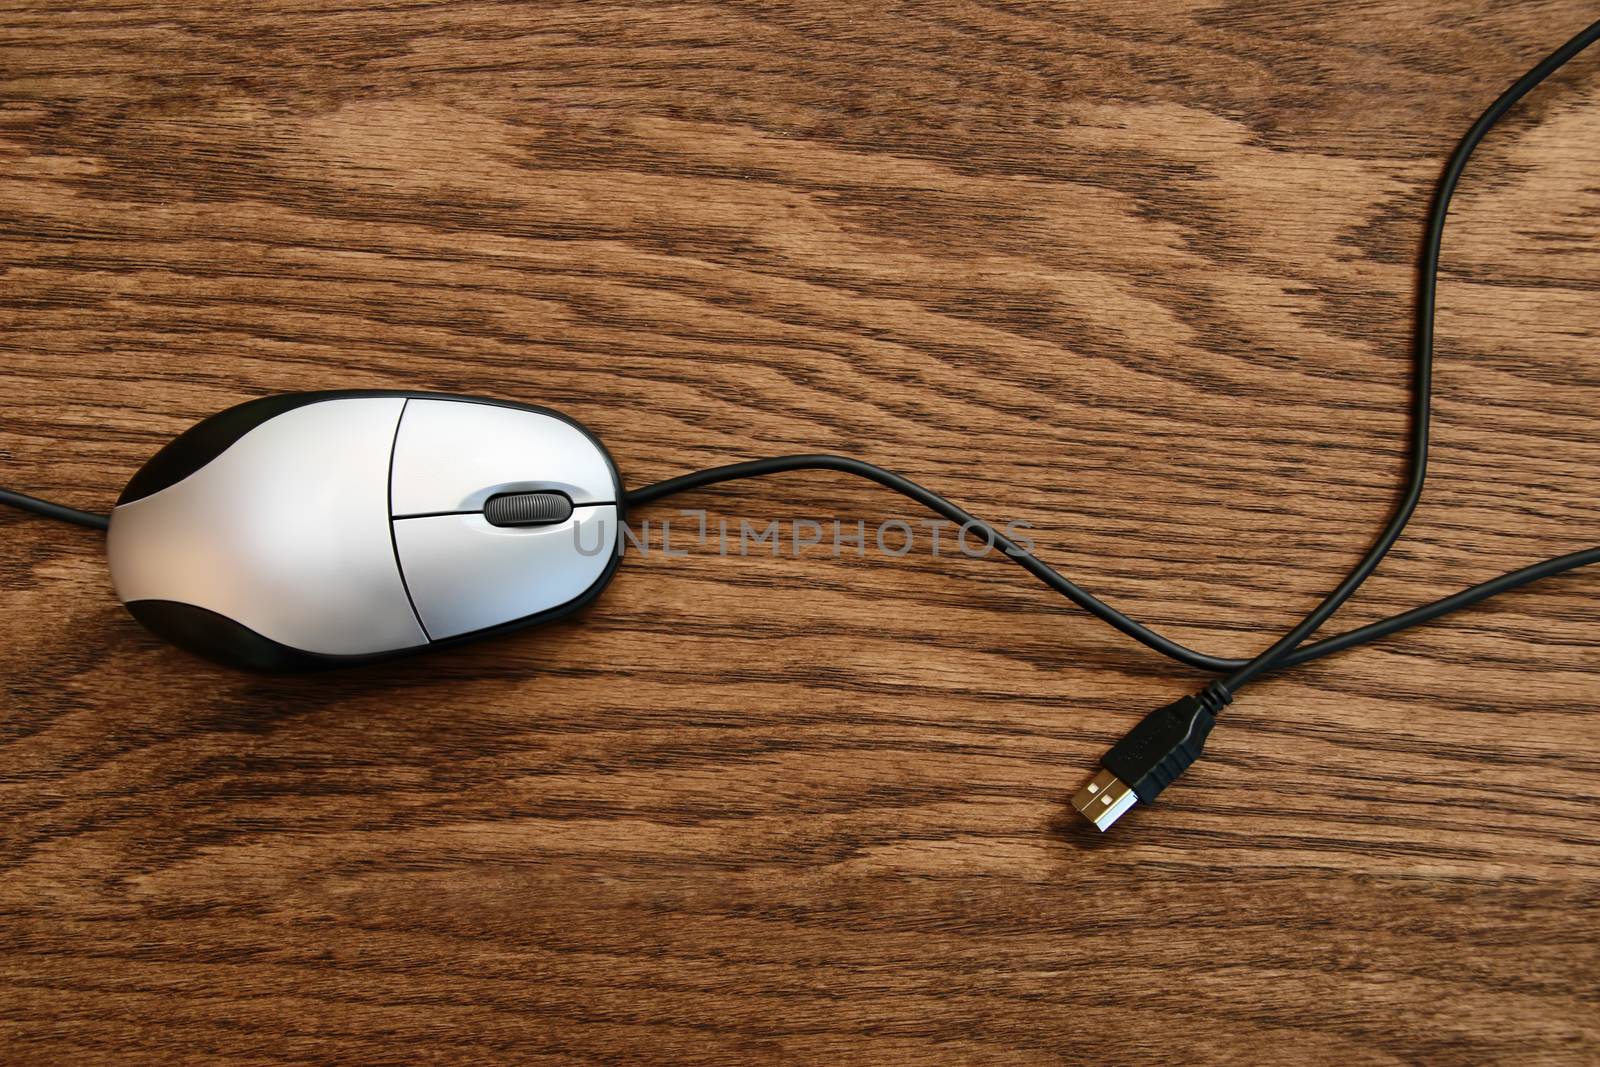 Computer mouse on wooden surface by Sandralise